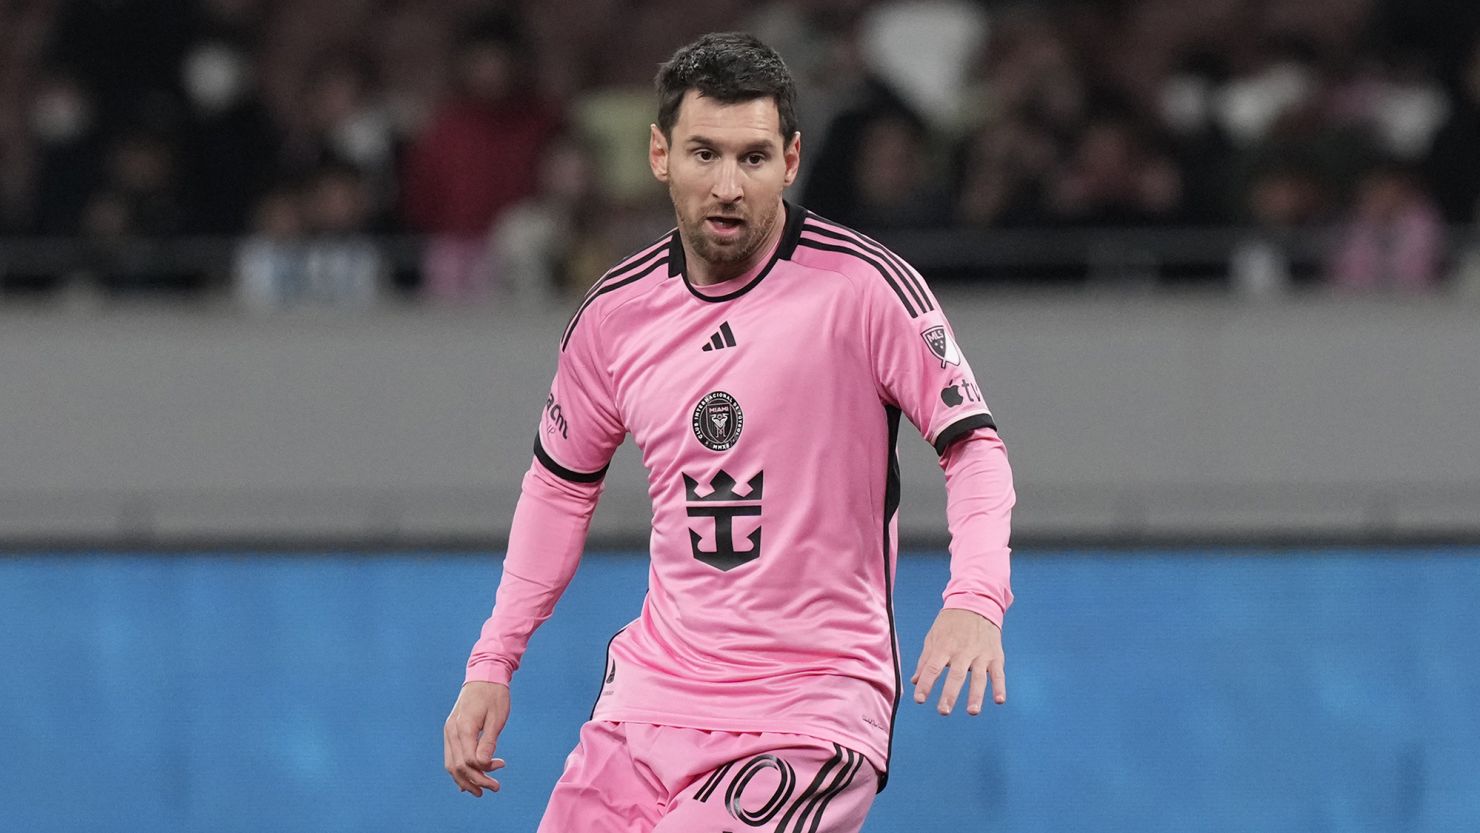 Inter Miami's Lionel Messi plays in the friendly soccer match between Vissel Kobe and Inter Miami at the National Stadium in Tokyo, Japan, on Feb 7.